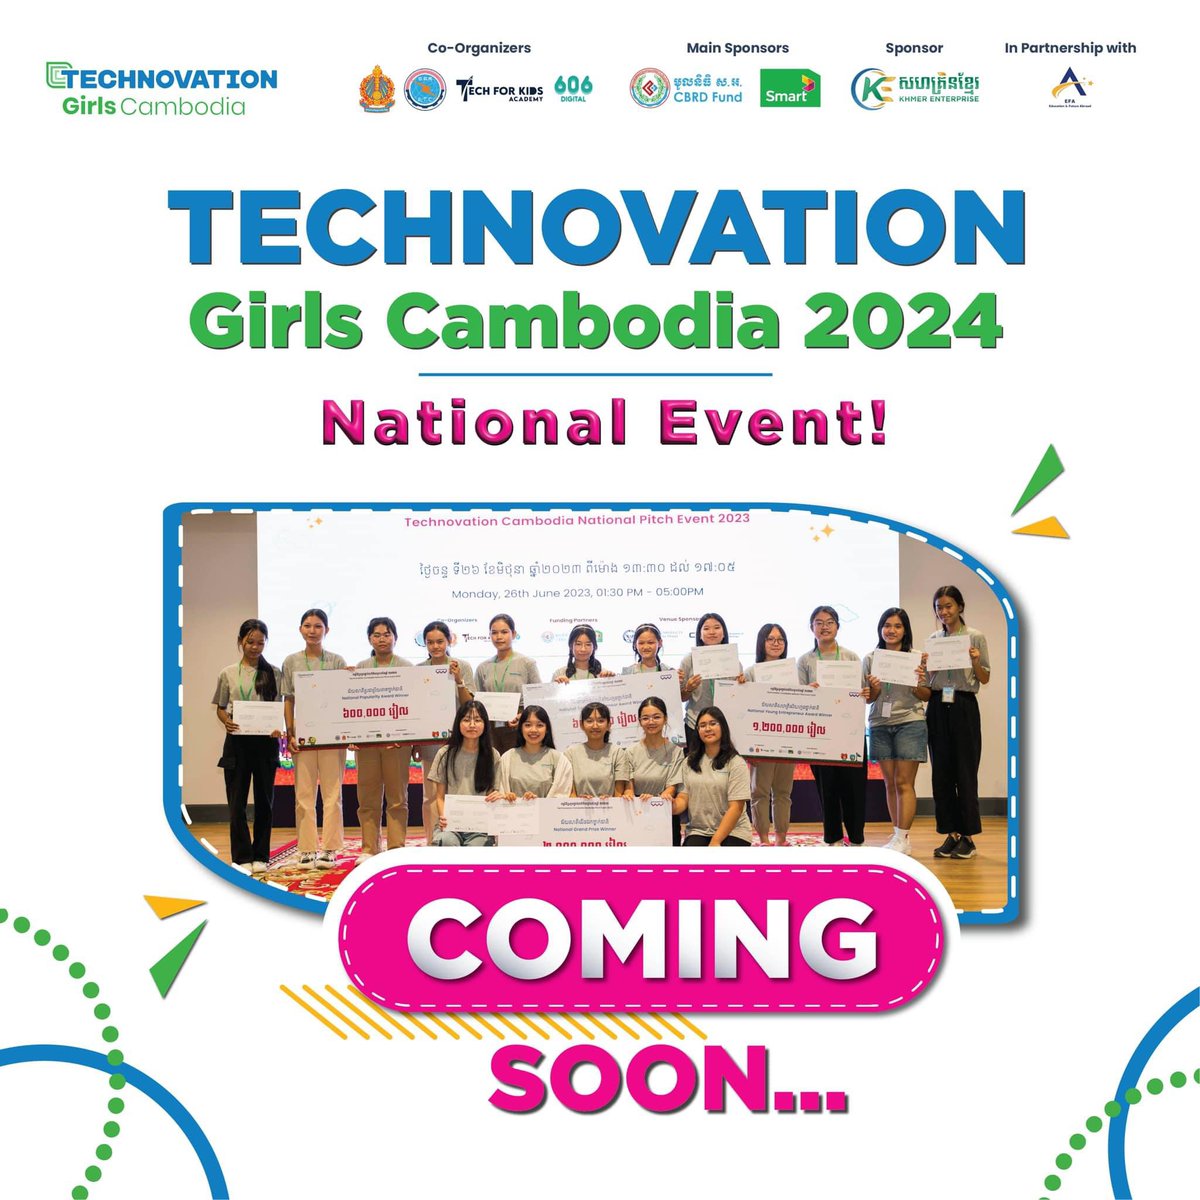 Exciting times ahead! 🎉 

The @technovation Girls Cambodia 2024 National Event is coming soon! 

Let’s inspire and empower the next generation of female tech innovators. @TechforKidsAcad  @SmartAxiata